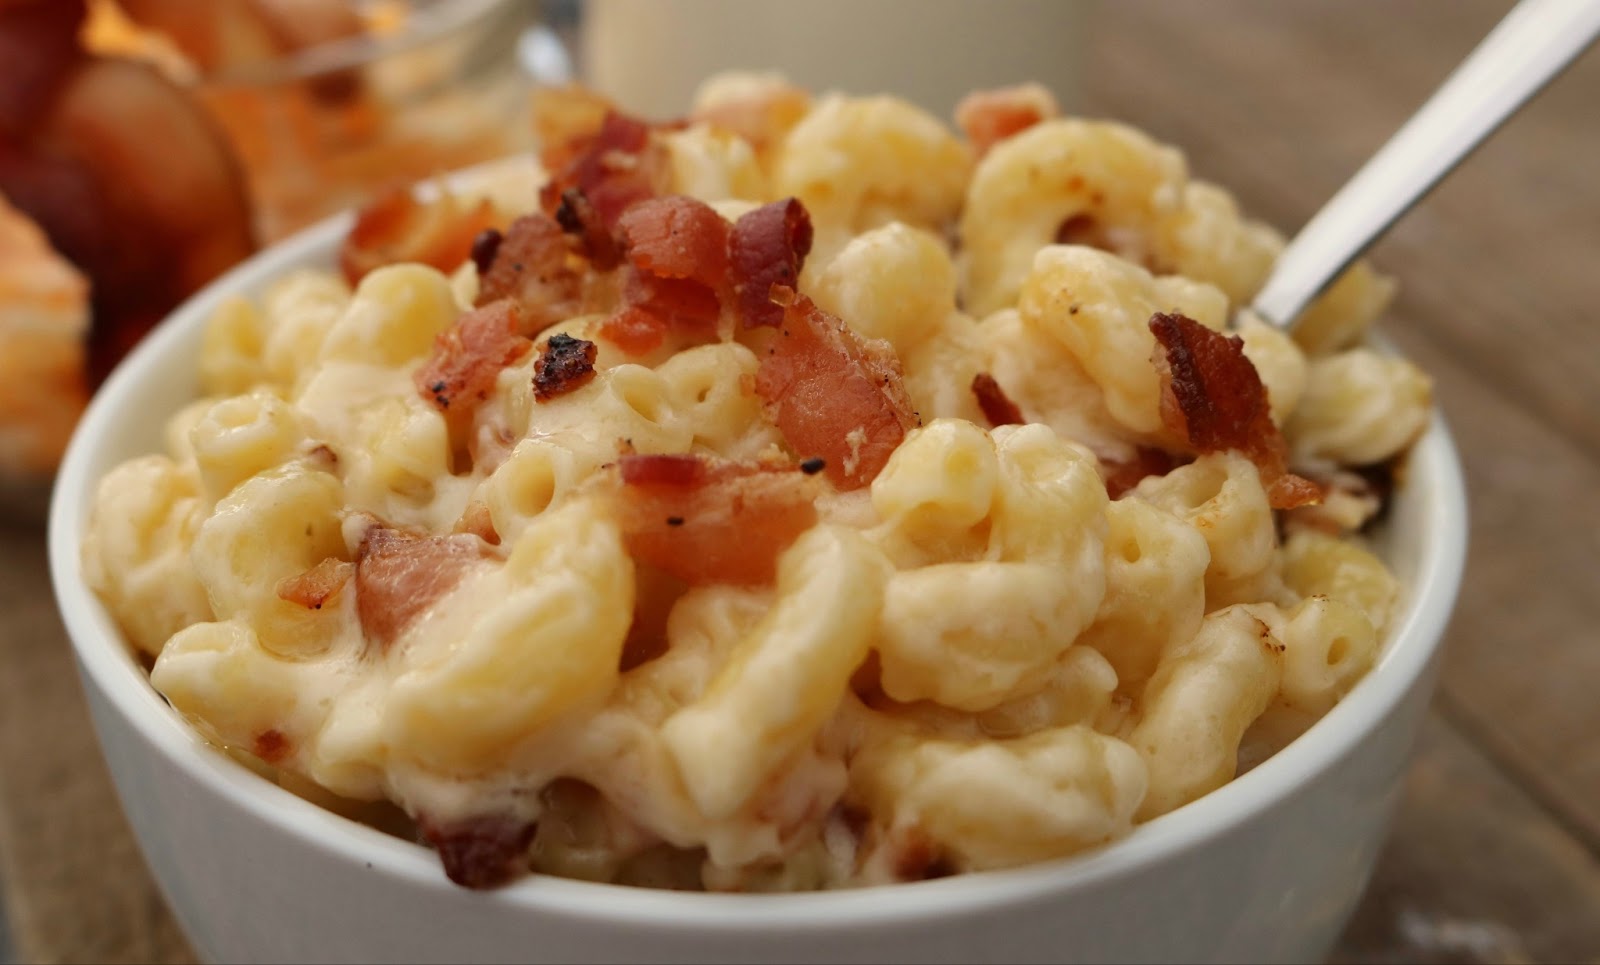 Pepper Jack Mac and cheese in a bowl